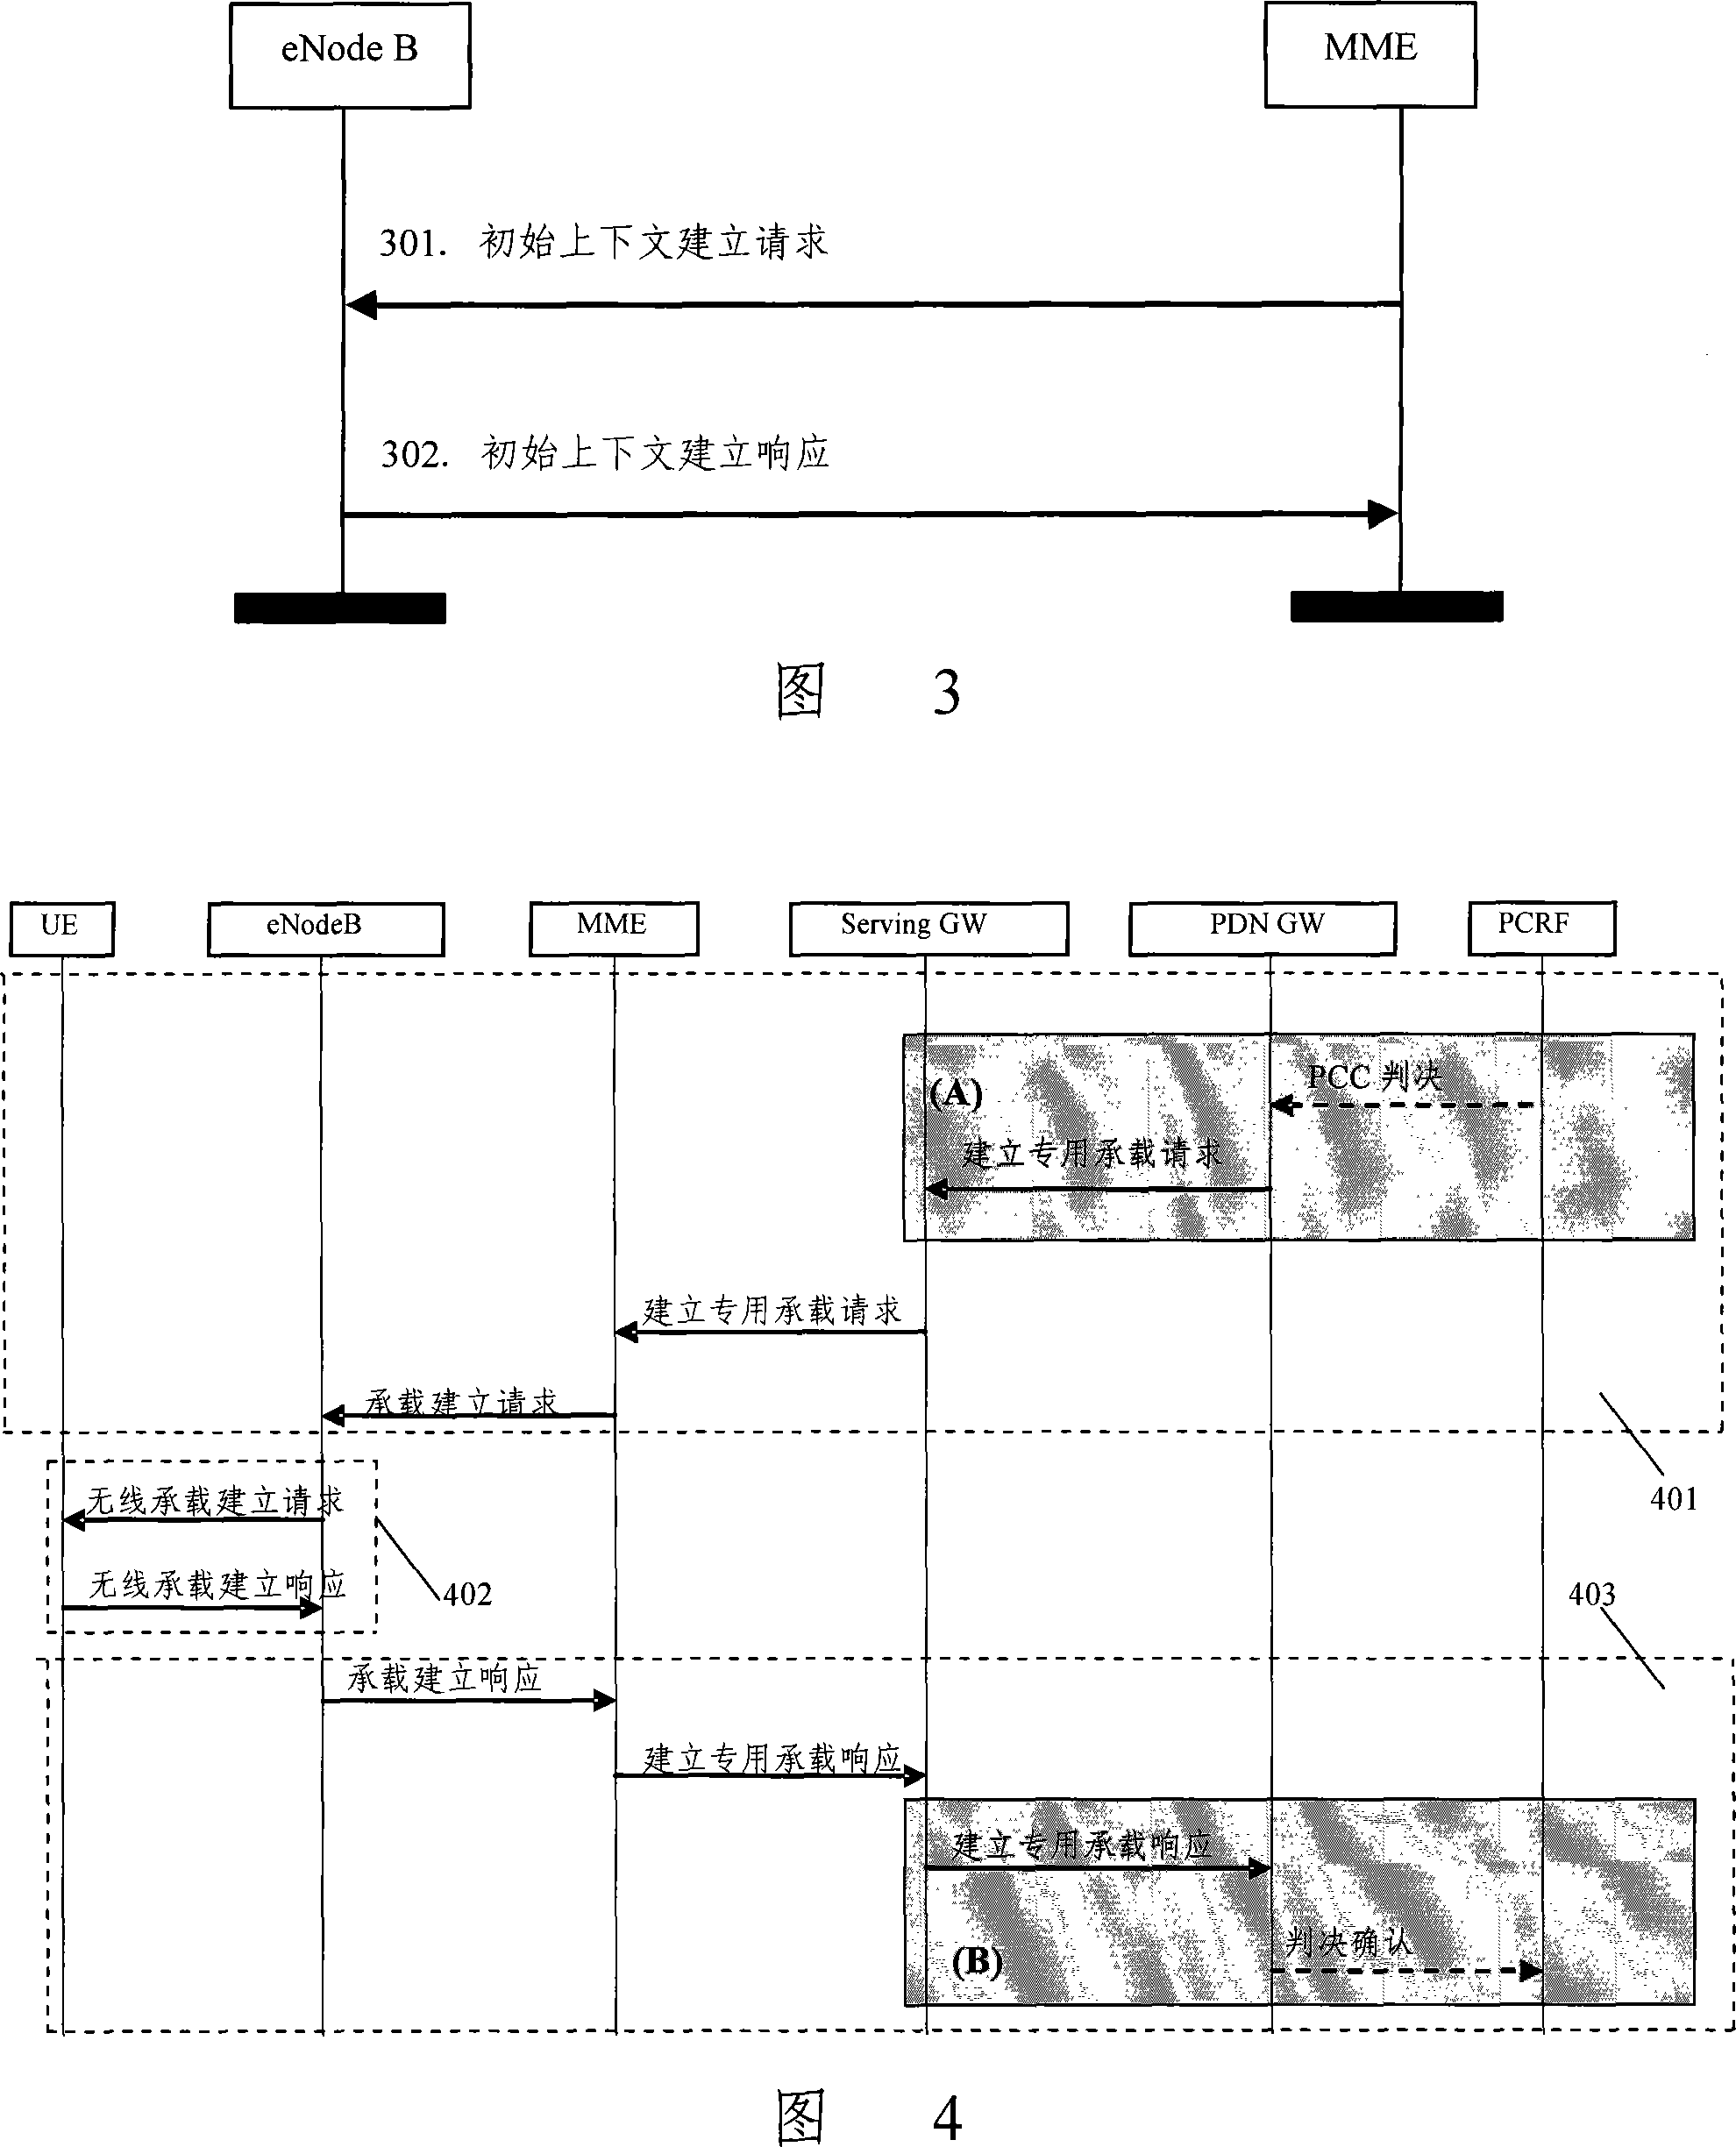 Processing method and device in scheduling of resources